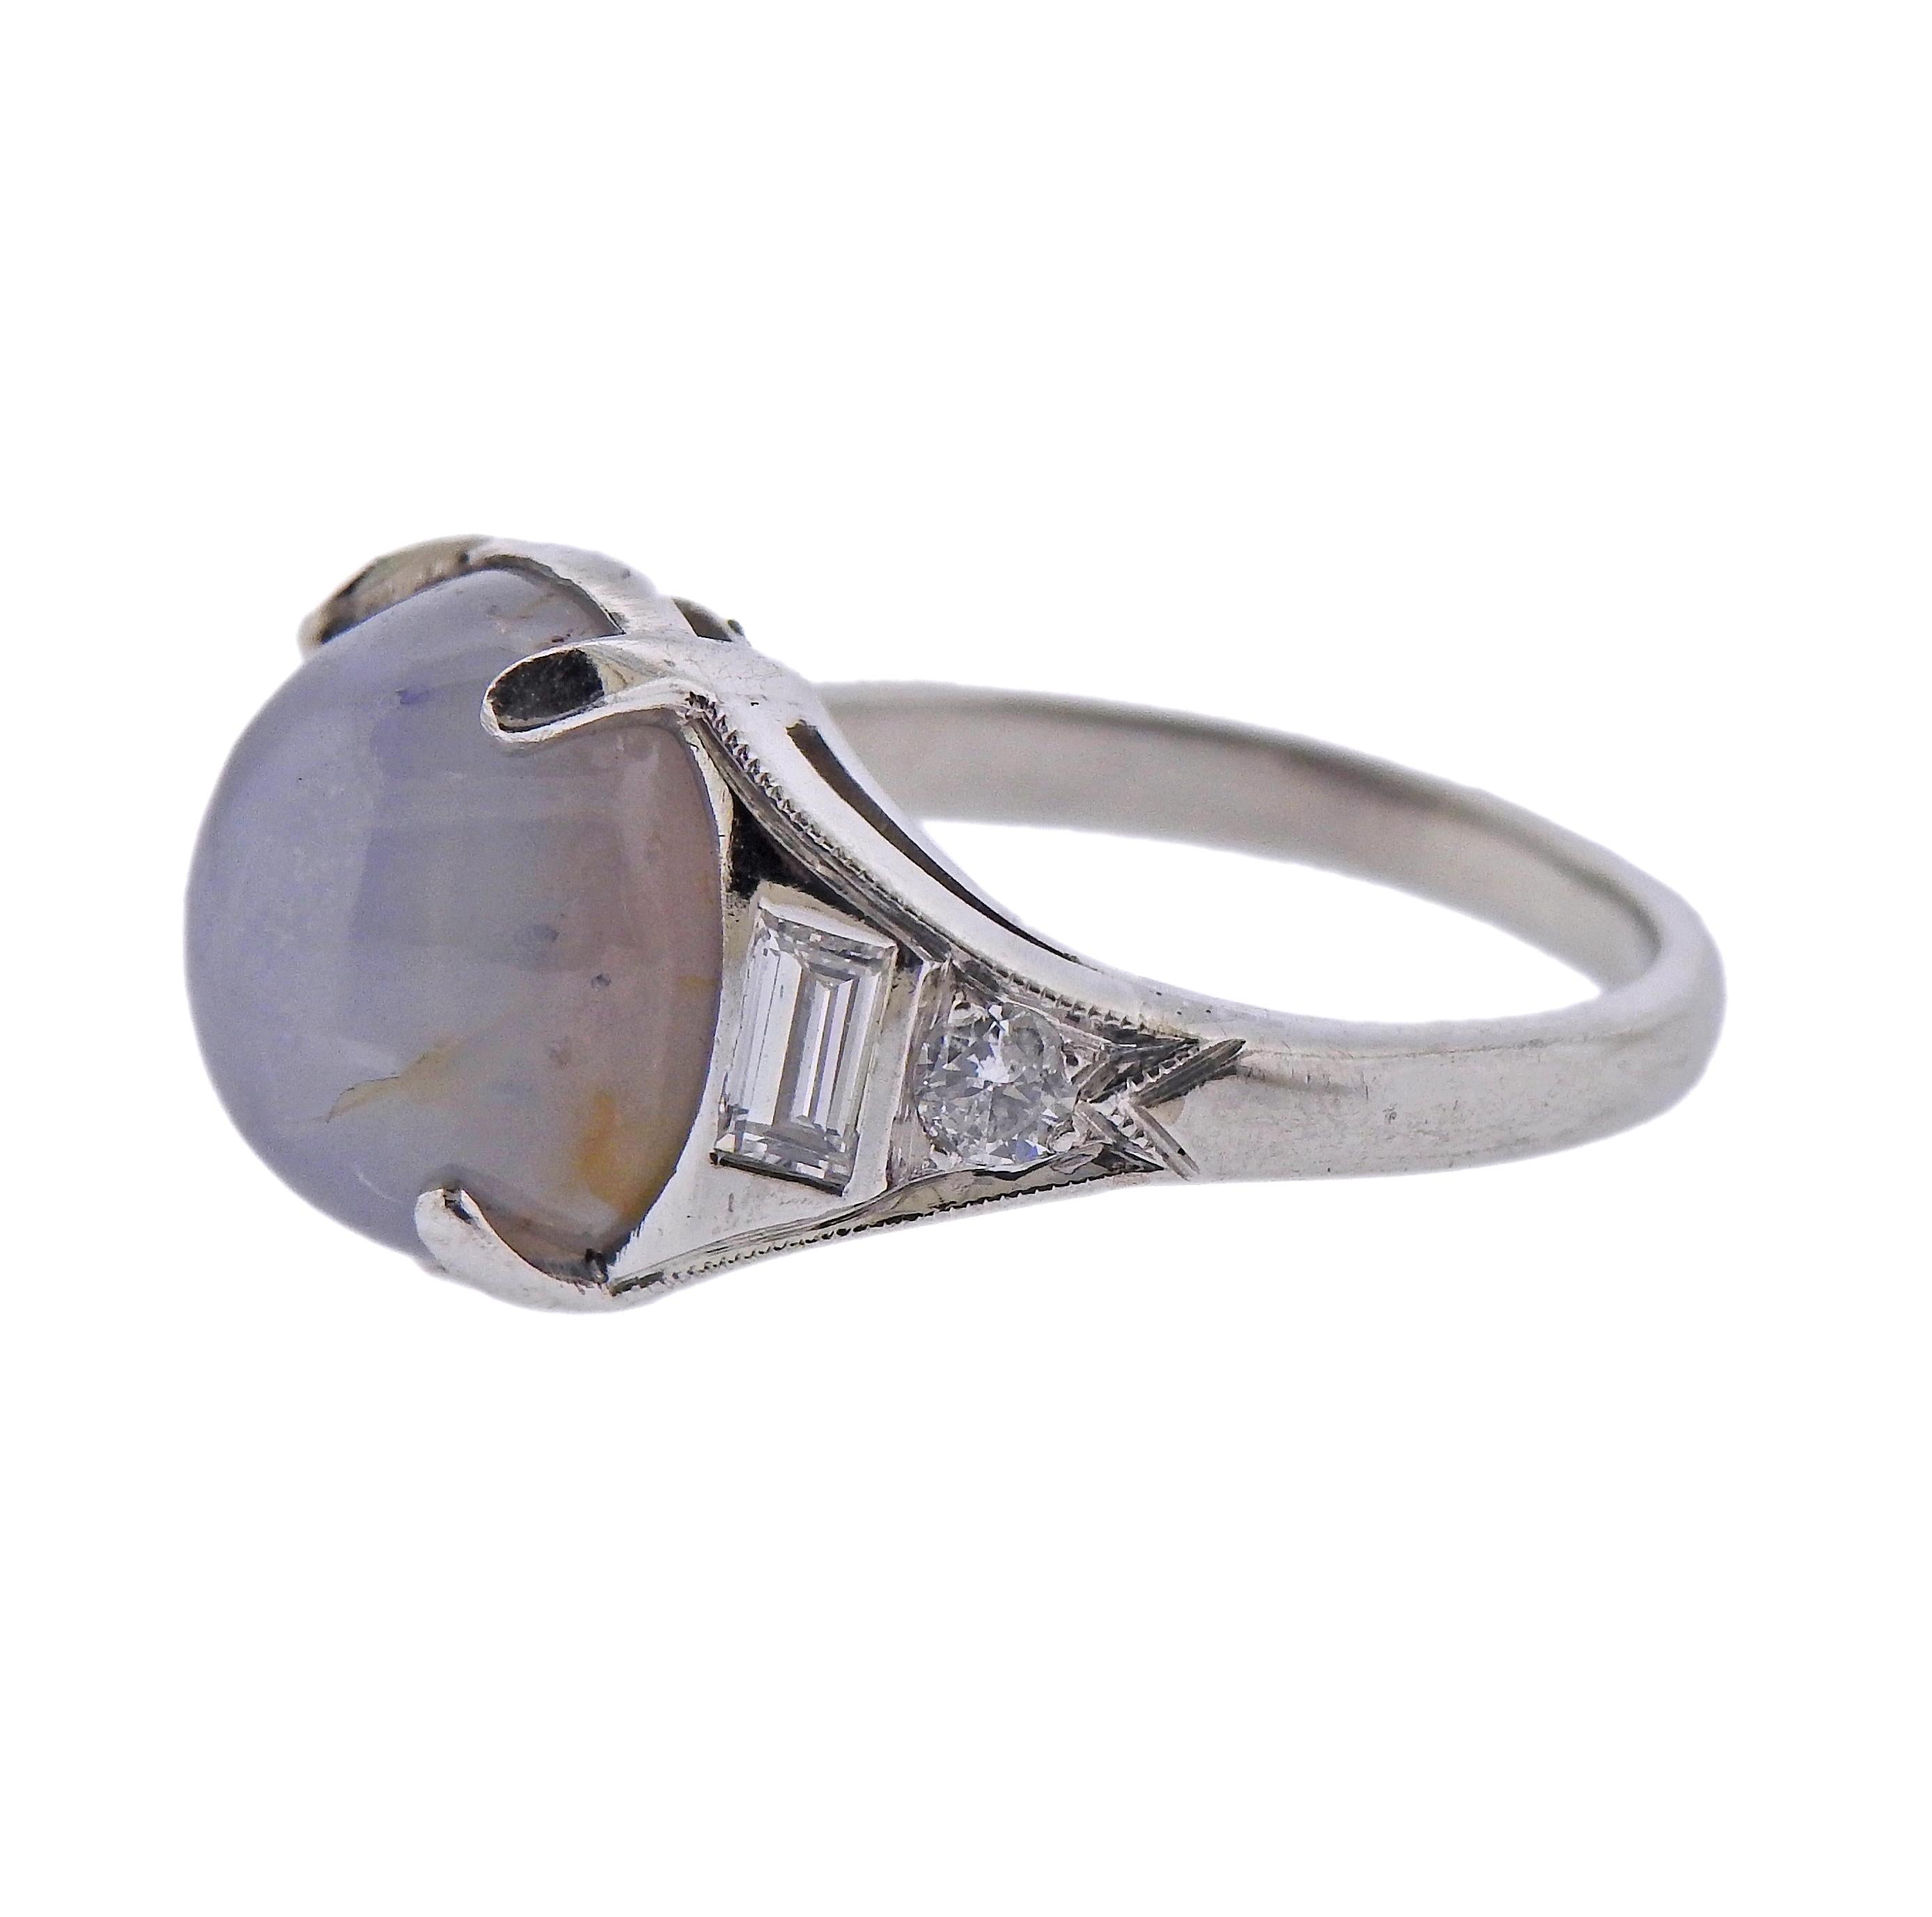 Platinum ring, with approx. 8 carat star sapphire cabochon, with  approx. 0.40ctw in side diamonds. Ring size - 4, ring top is 11mm wide. Marked with partially polished off platinum mark. Weight - 5.6 grams. 